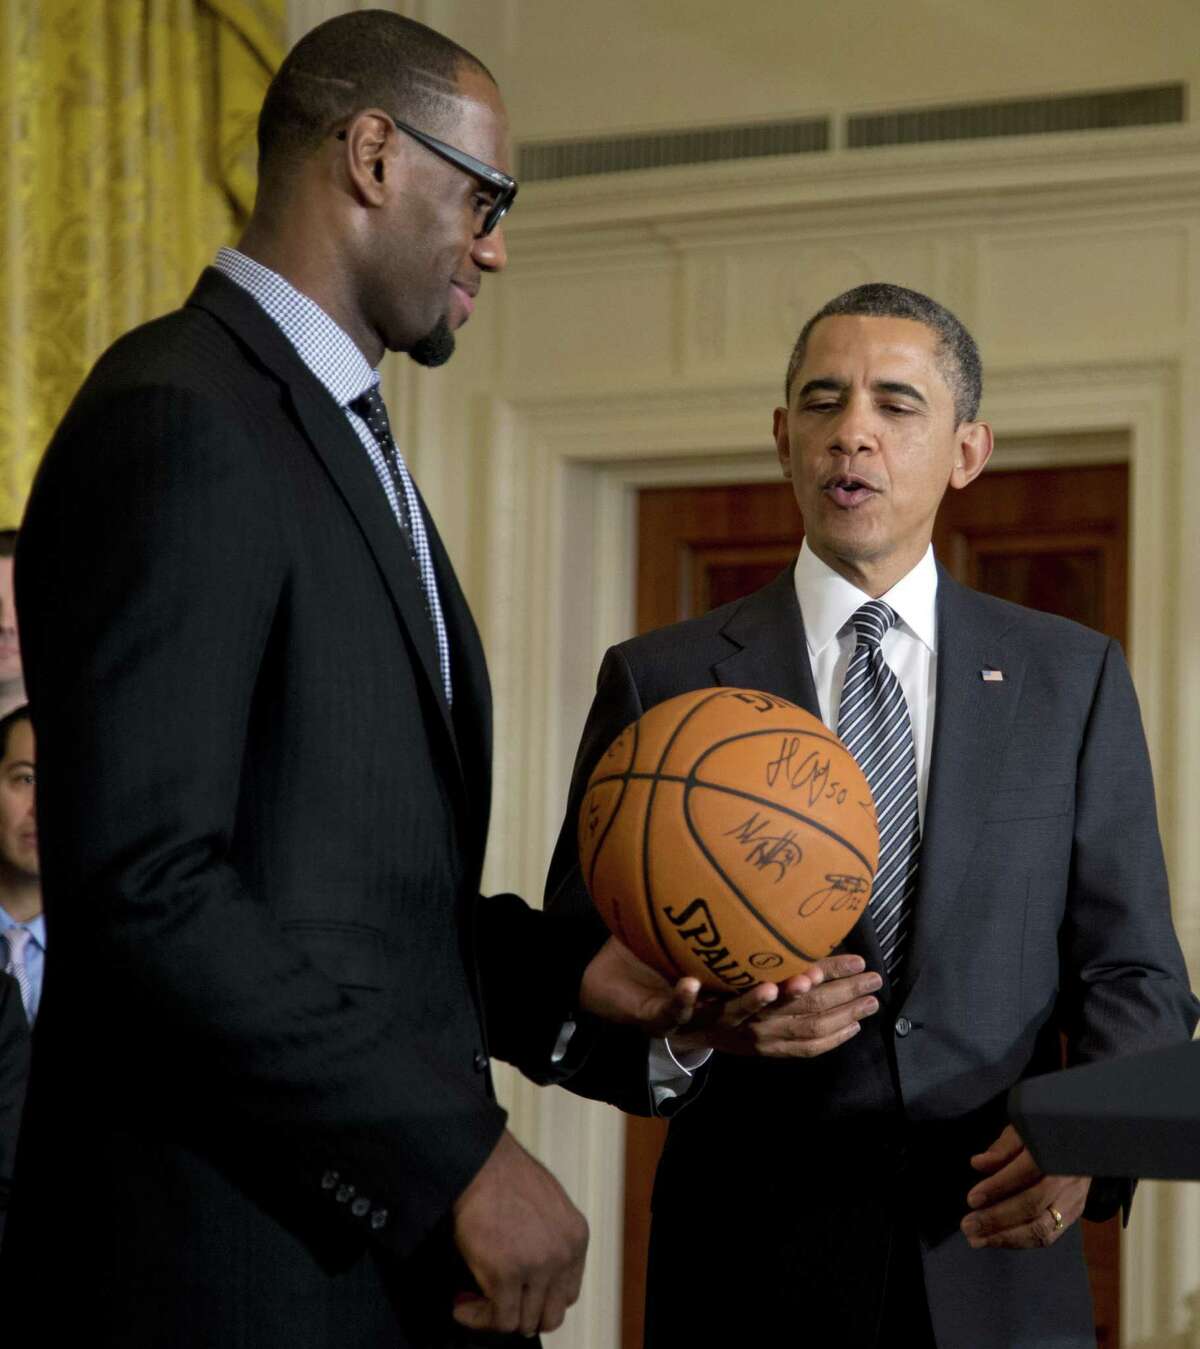 President Barack Obama accepts a signed basketball from Miami Heat forward LeBron James as he welcomes the the NBA basketball champion Miami Heat, to the East Room of the White House, Monday, Jan. 28, 2013, in Washington. (AP Photo/Carolyn Kaster)